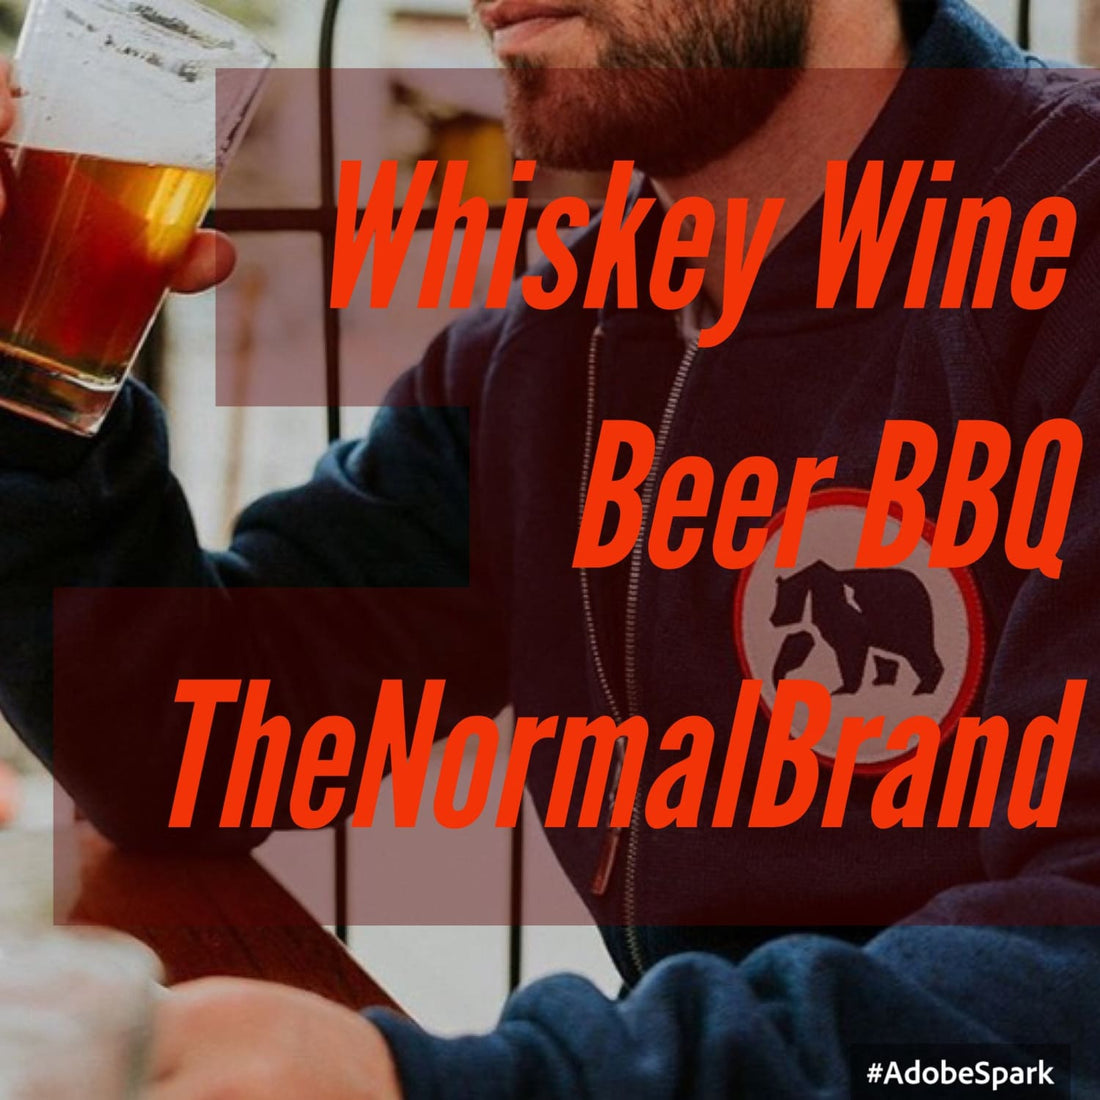 Whiskey Tasting Event with The Normal Brand